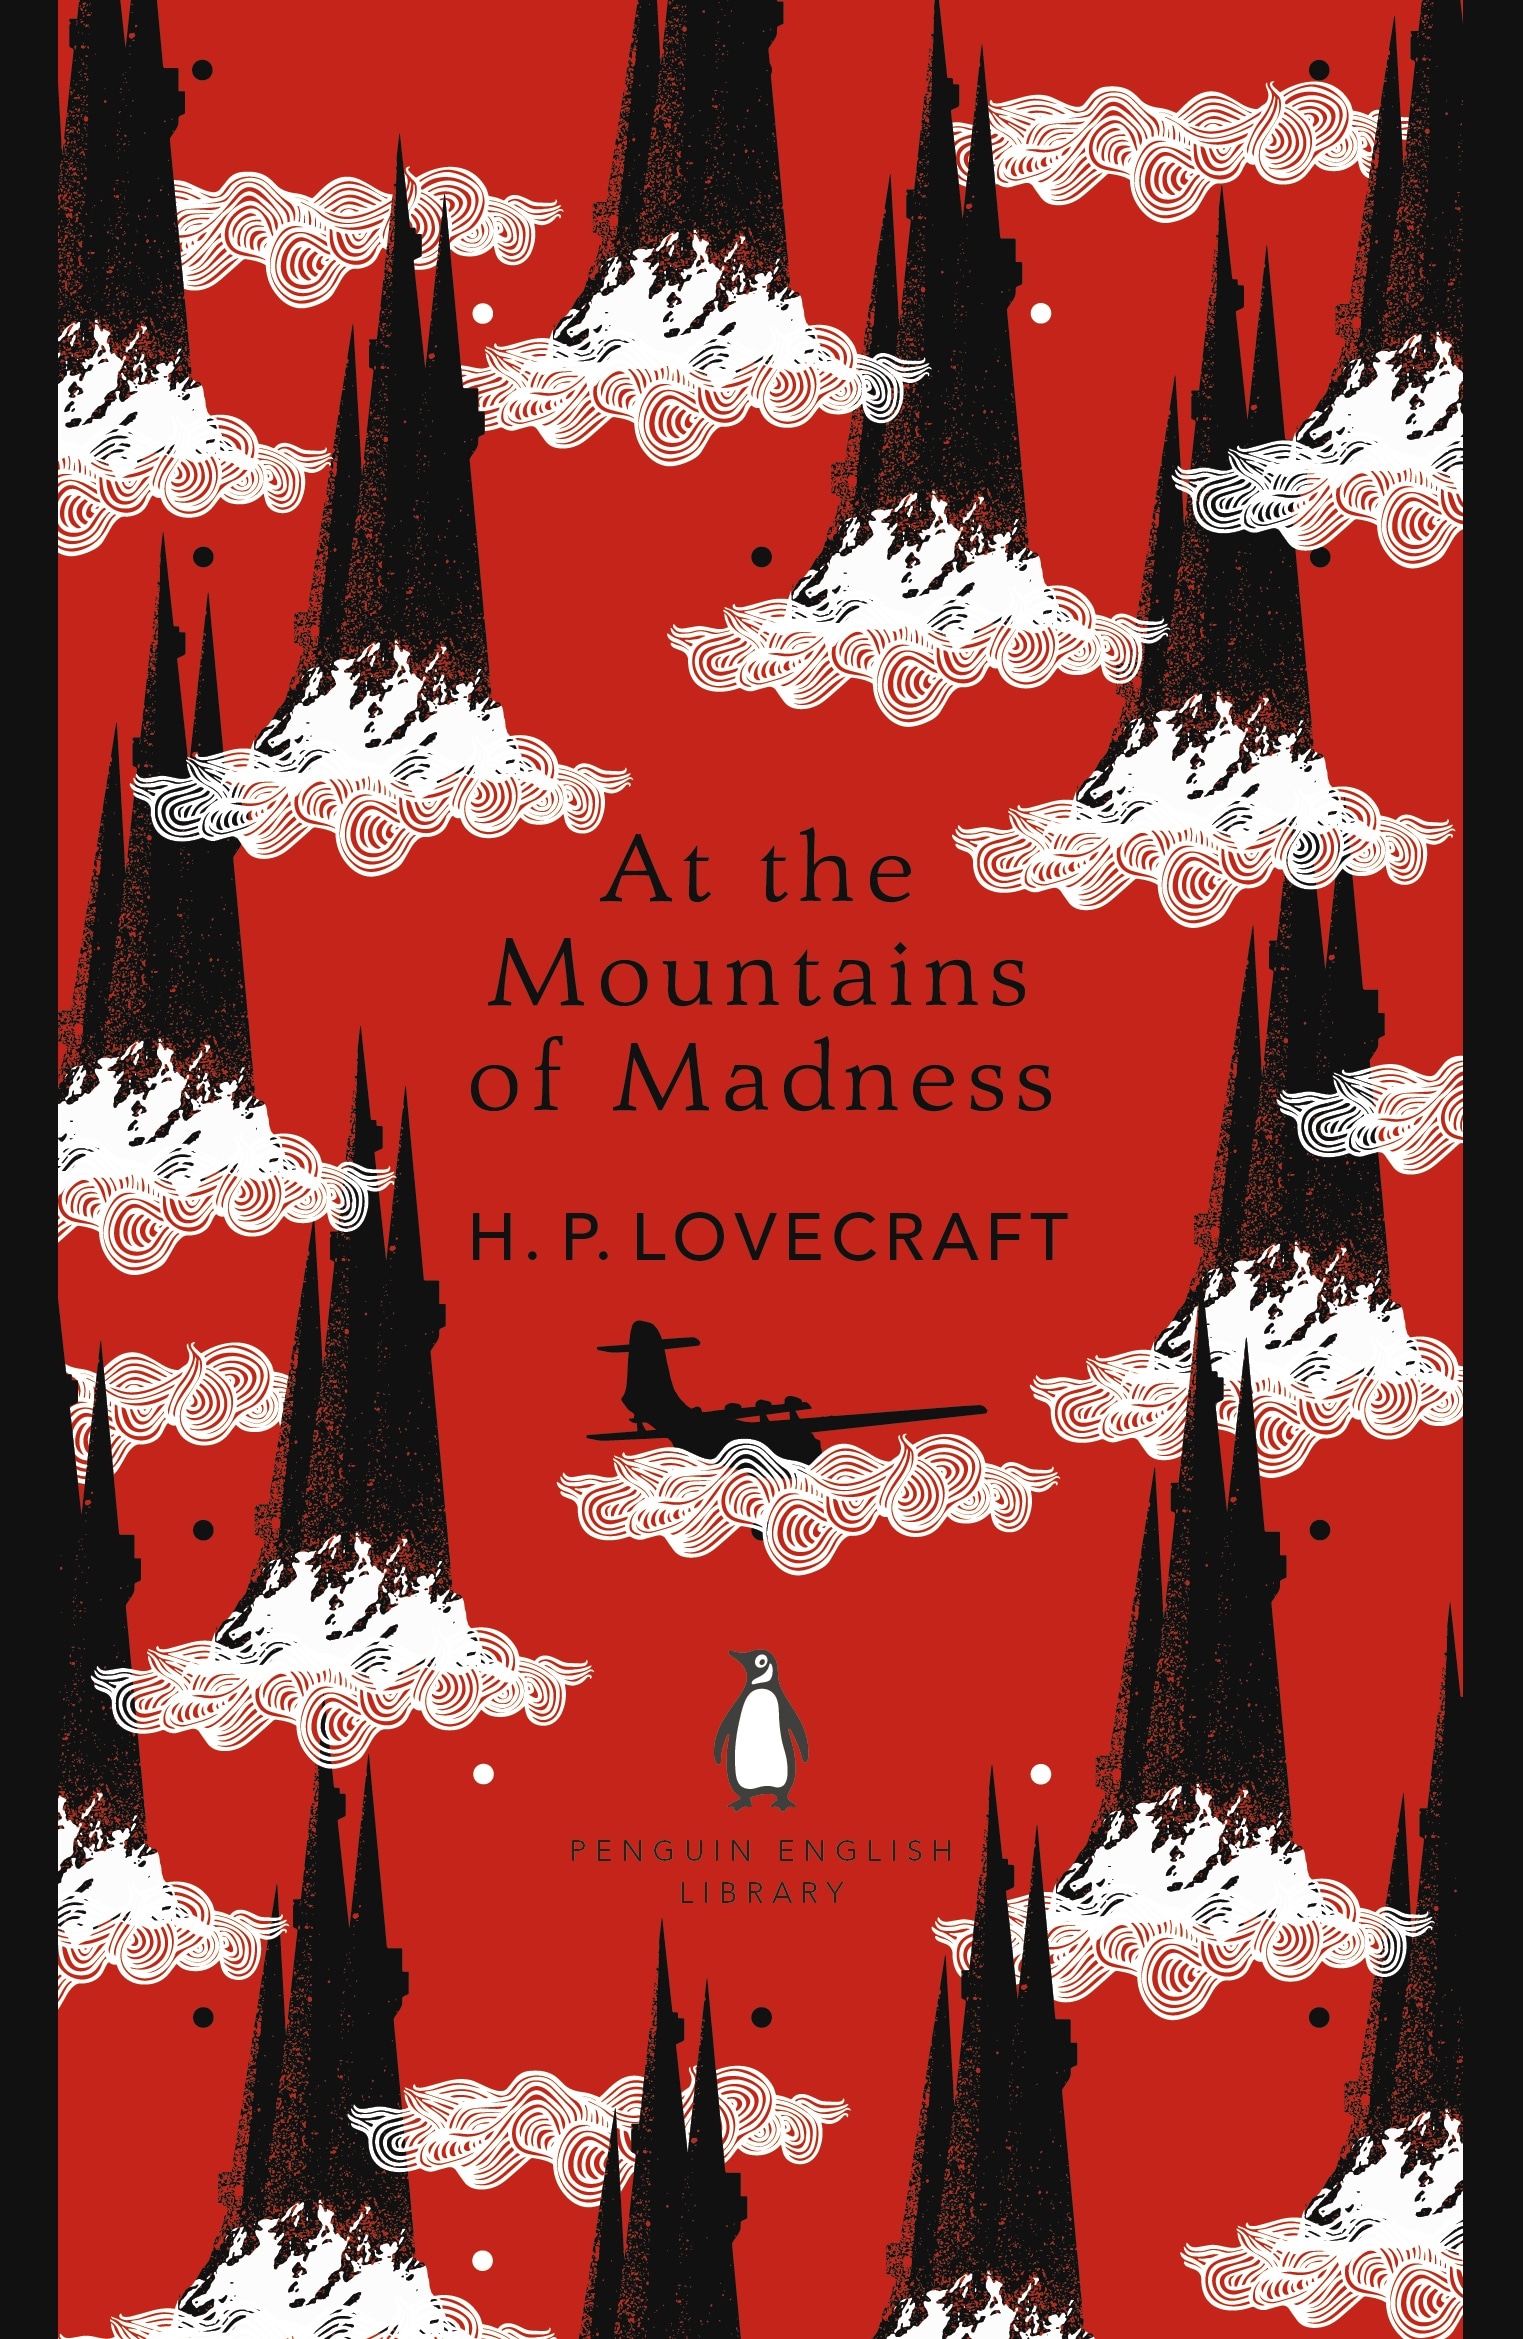 Book “At the Mountains of Madness” by H. P. Lovecraft — June 7, 2018